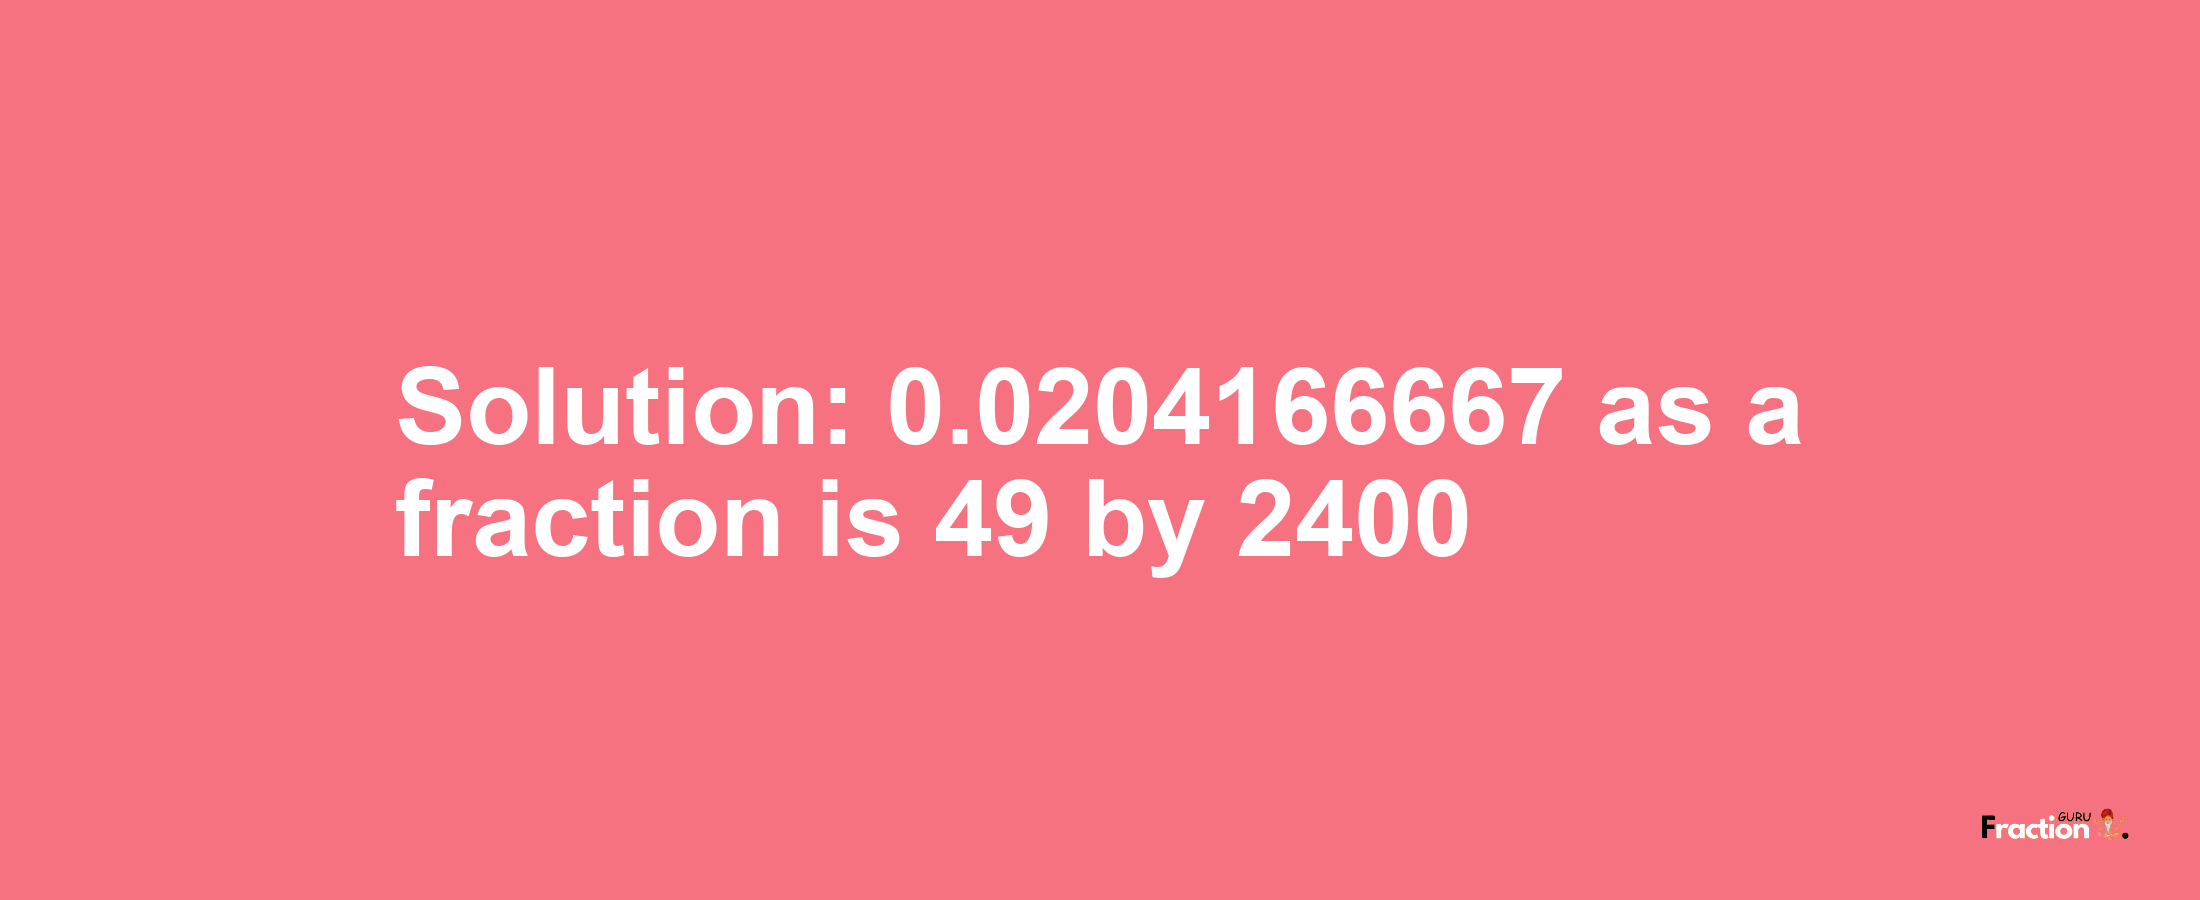 Solution:0.0204166667 as a fraction is 49/2400